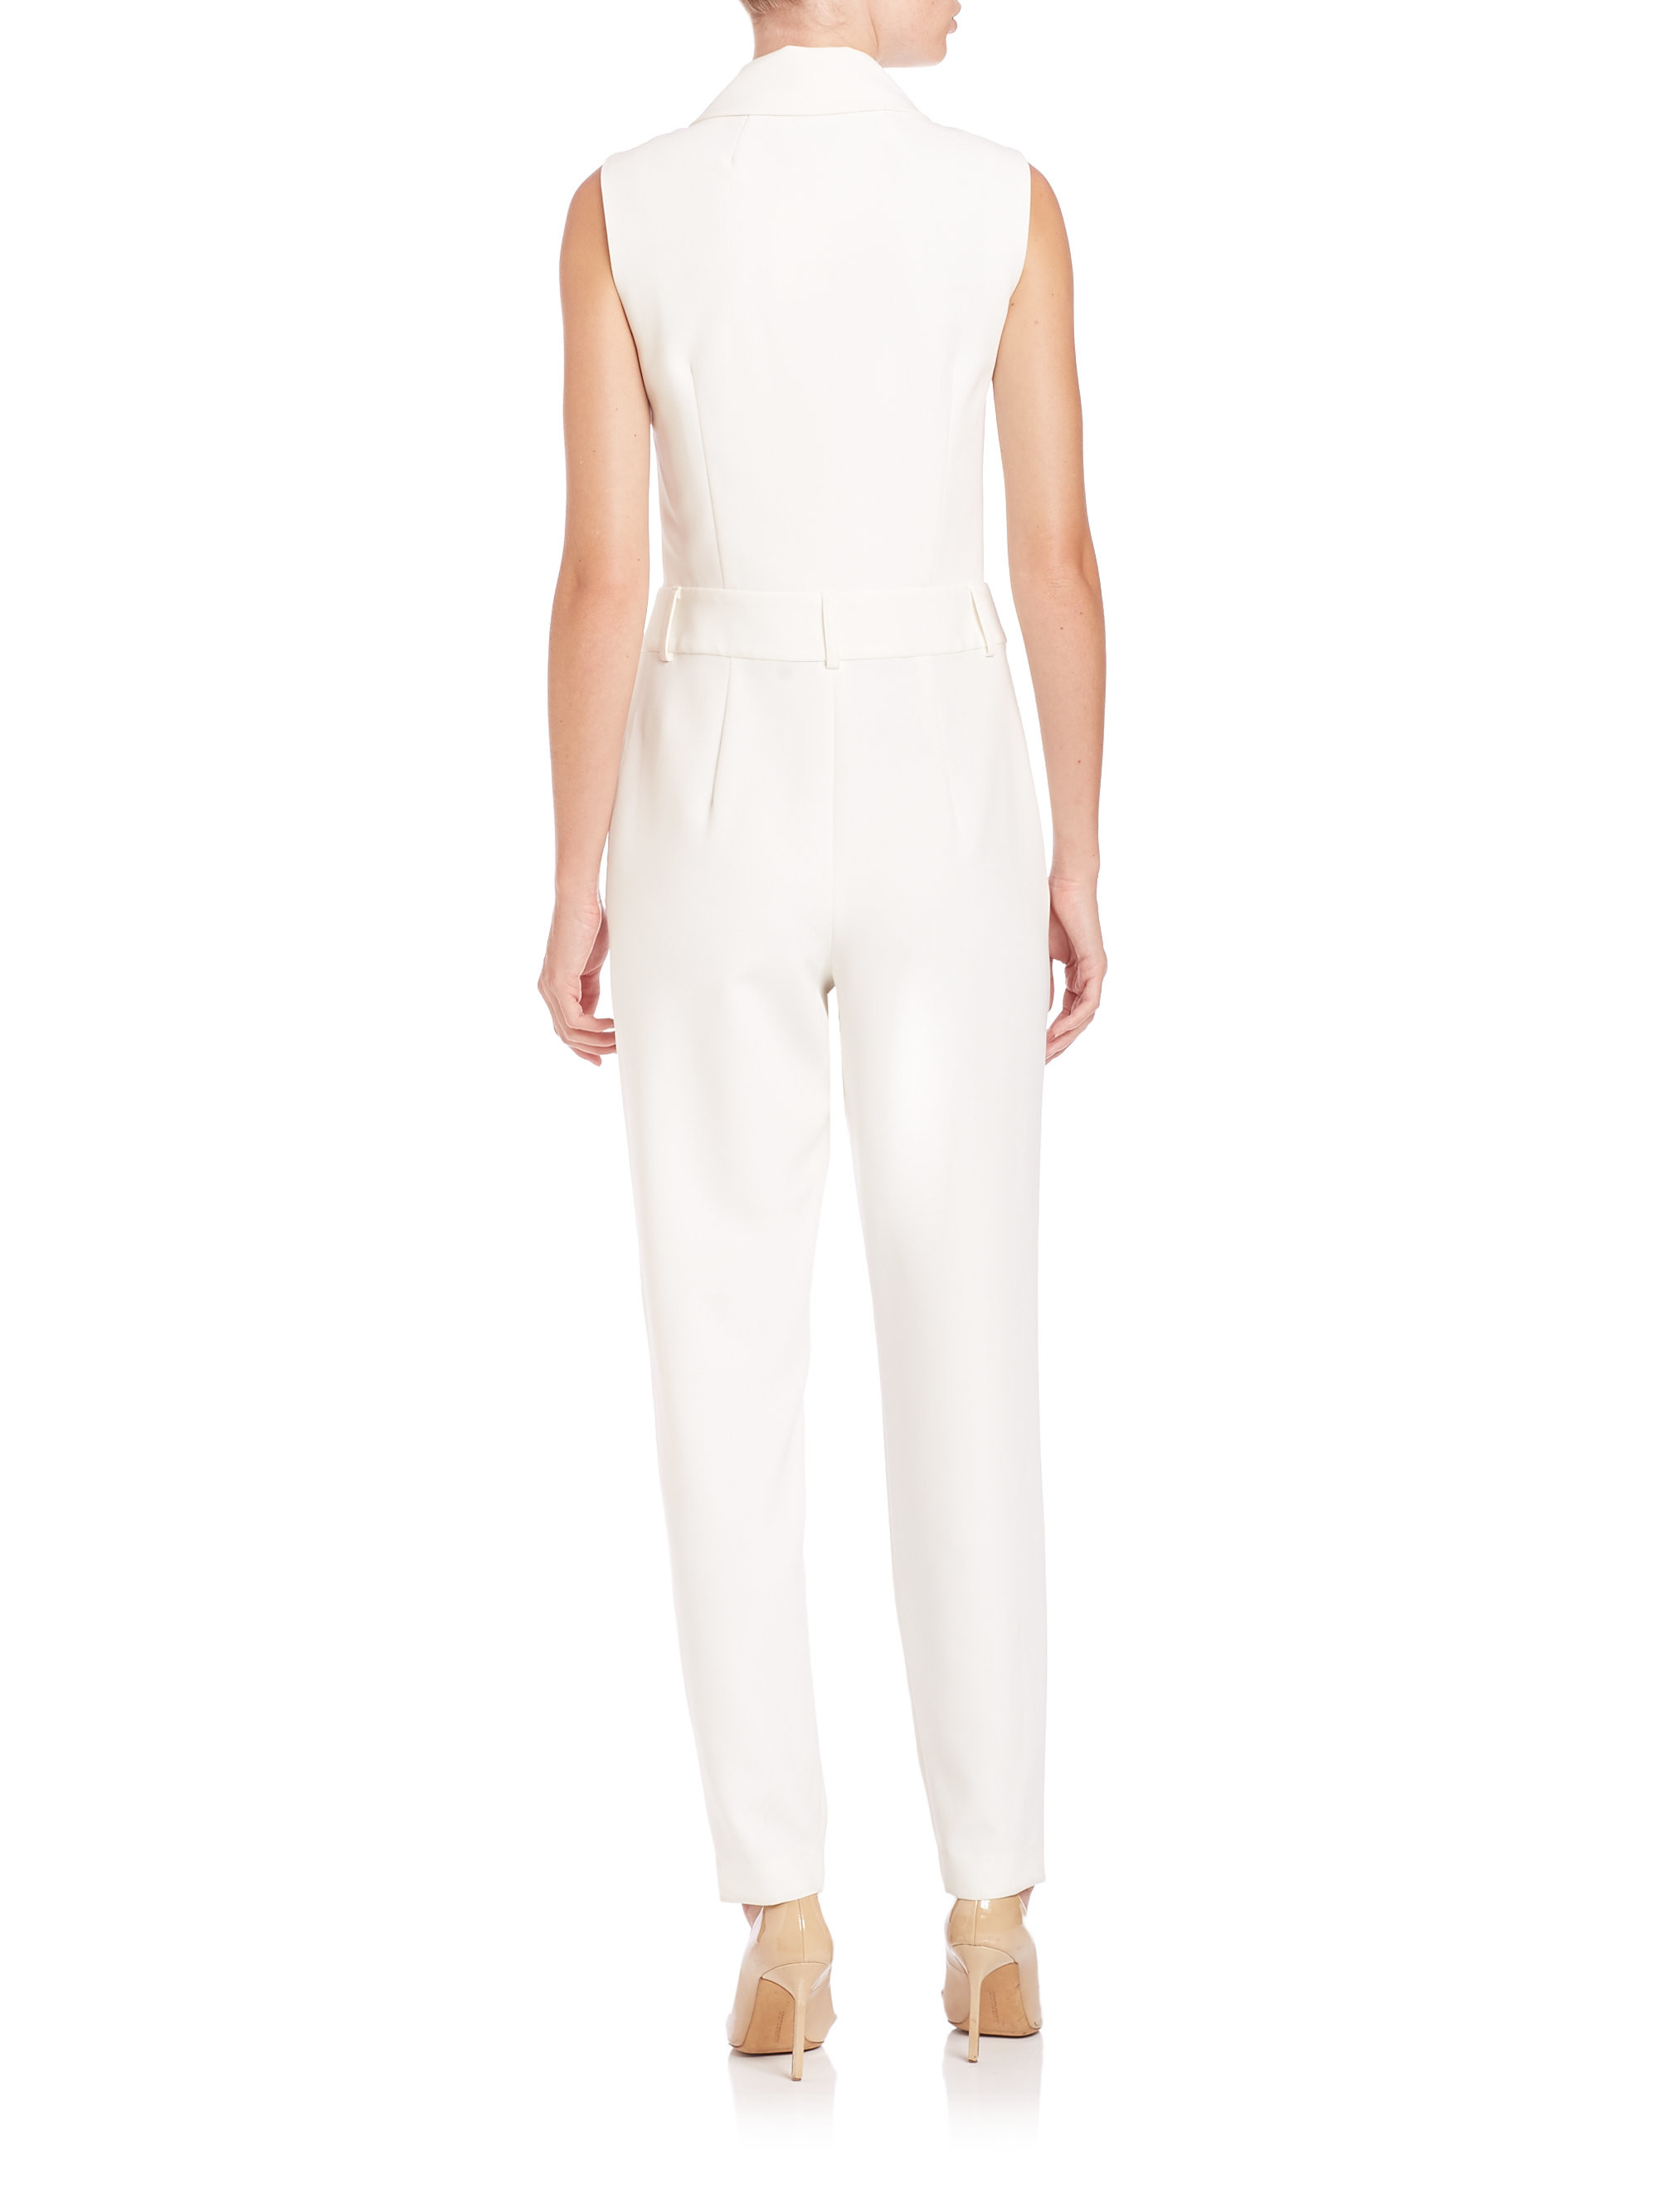 MILLY Tuxedo Jumpsuit in White - Lyst